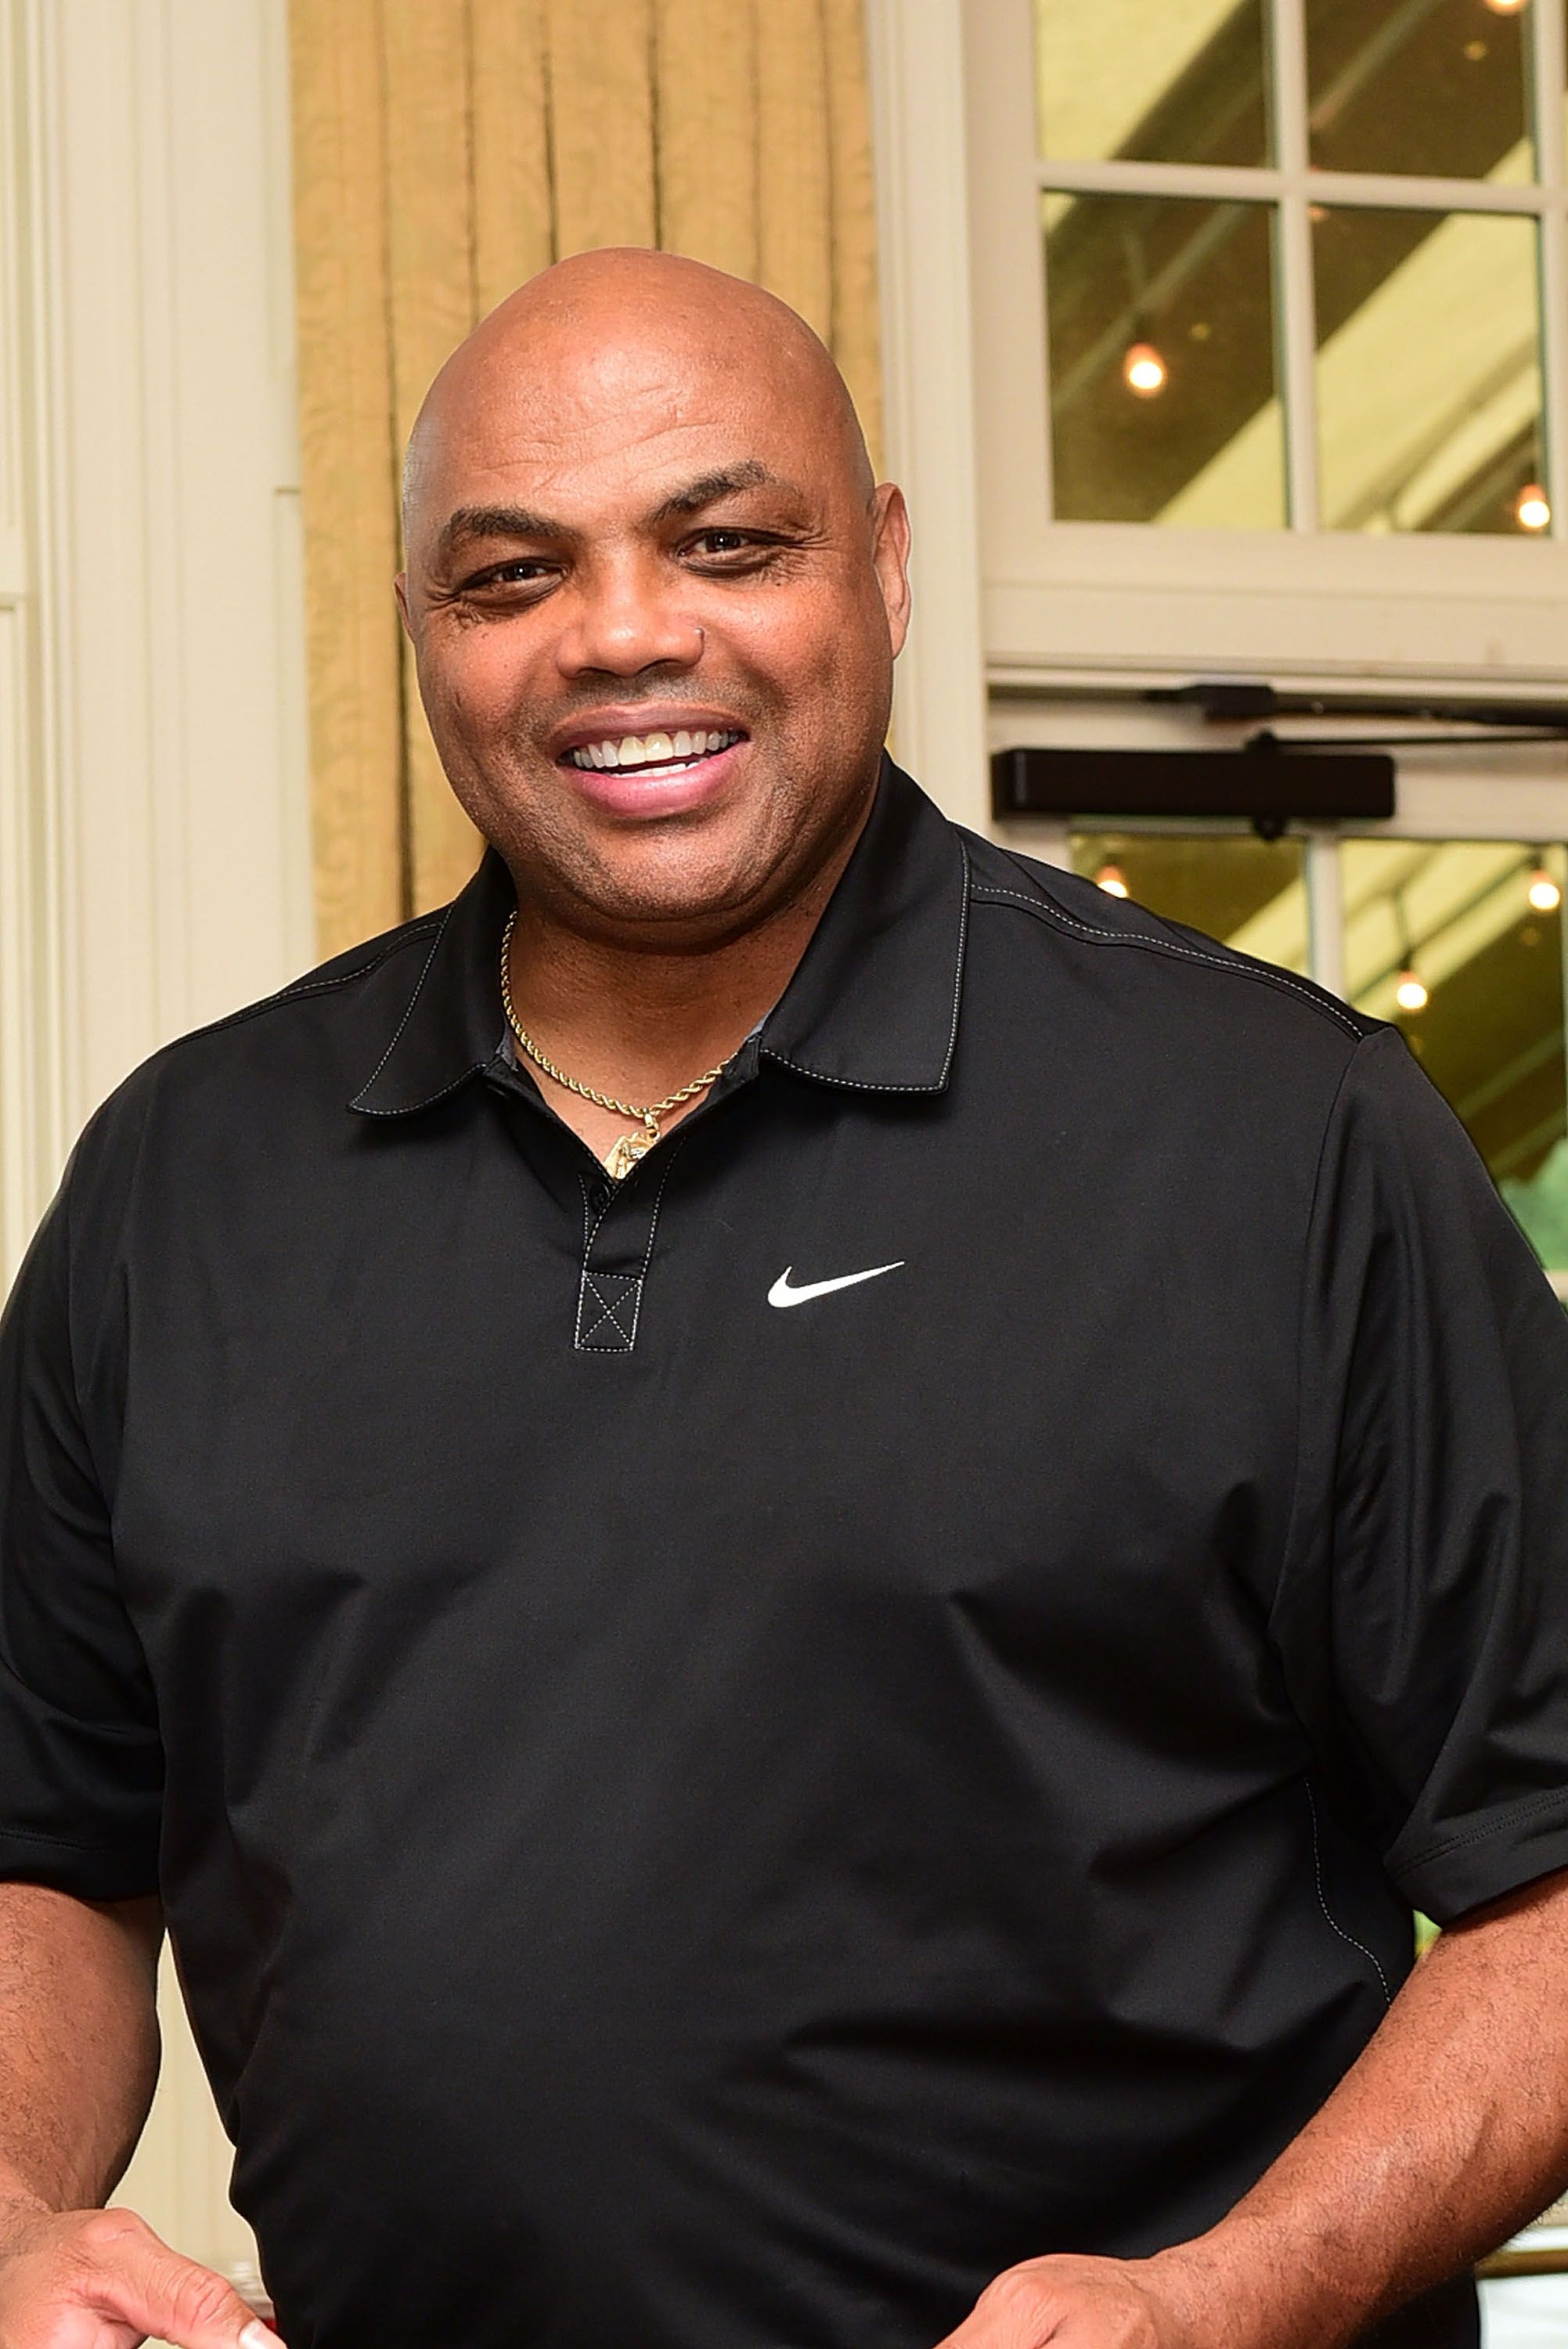 NBA legend Charles Barkley at Edgewood Tahoe Golf Course in Nevada in 2019 | Source: Getty Images